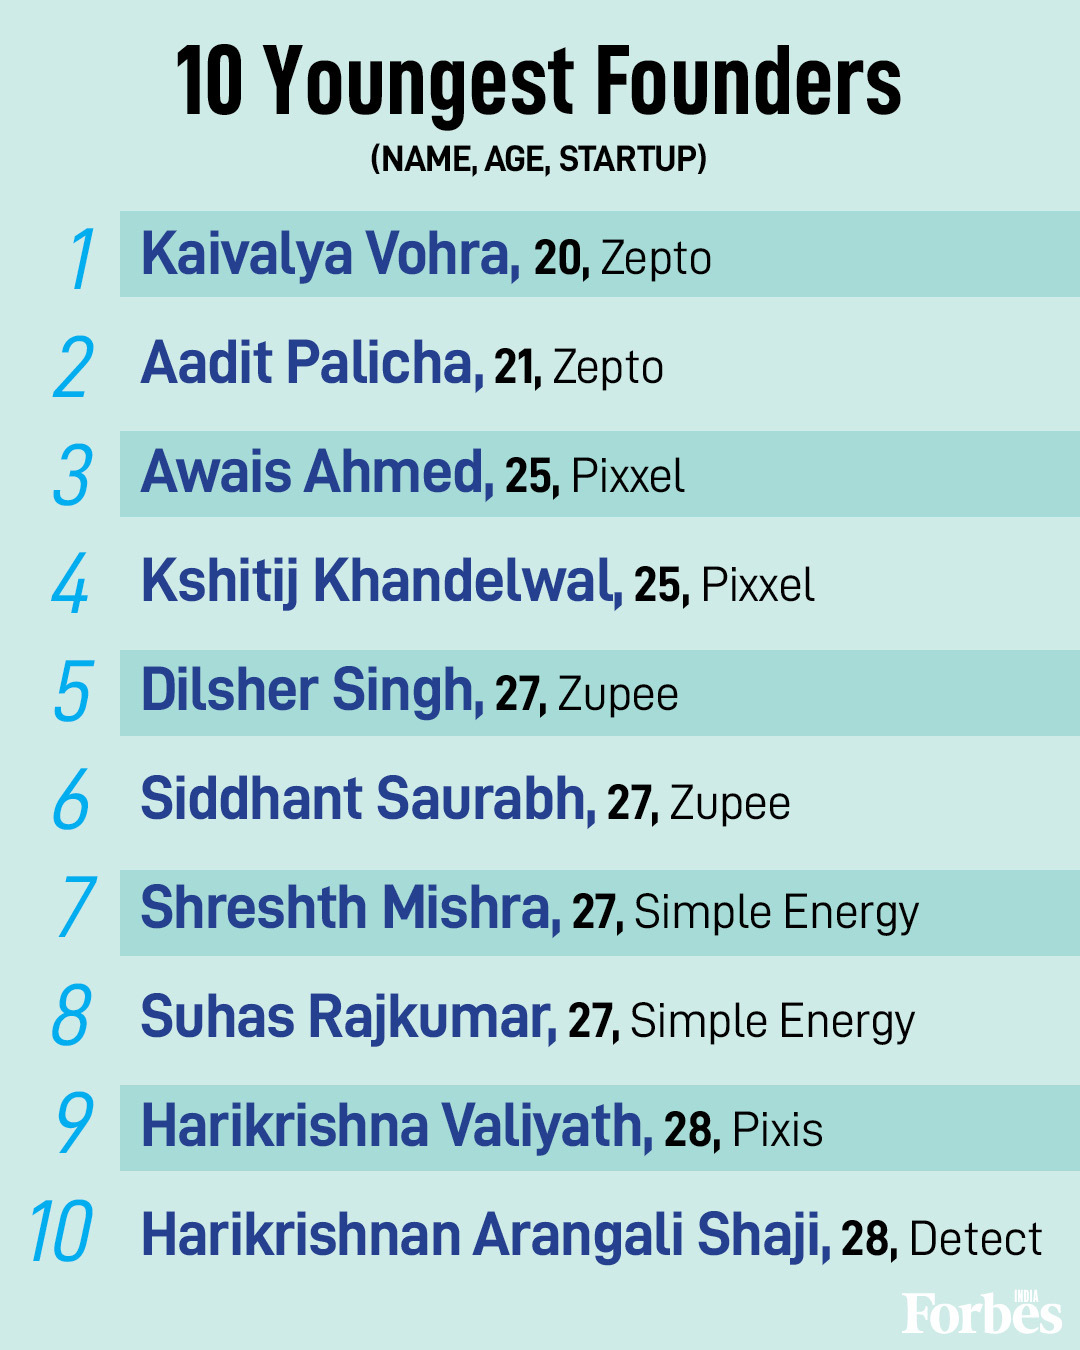 From top angel investors to best educational institutes, a look at players in the Indian startup landscape